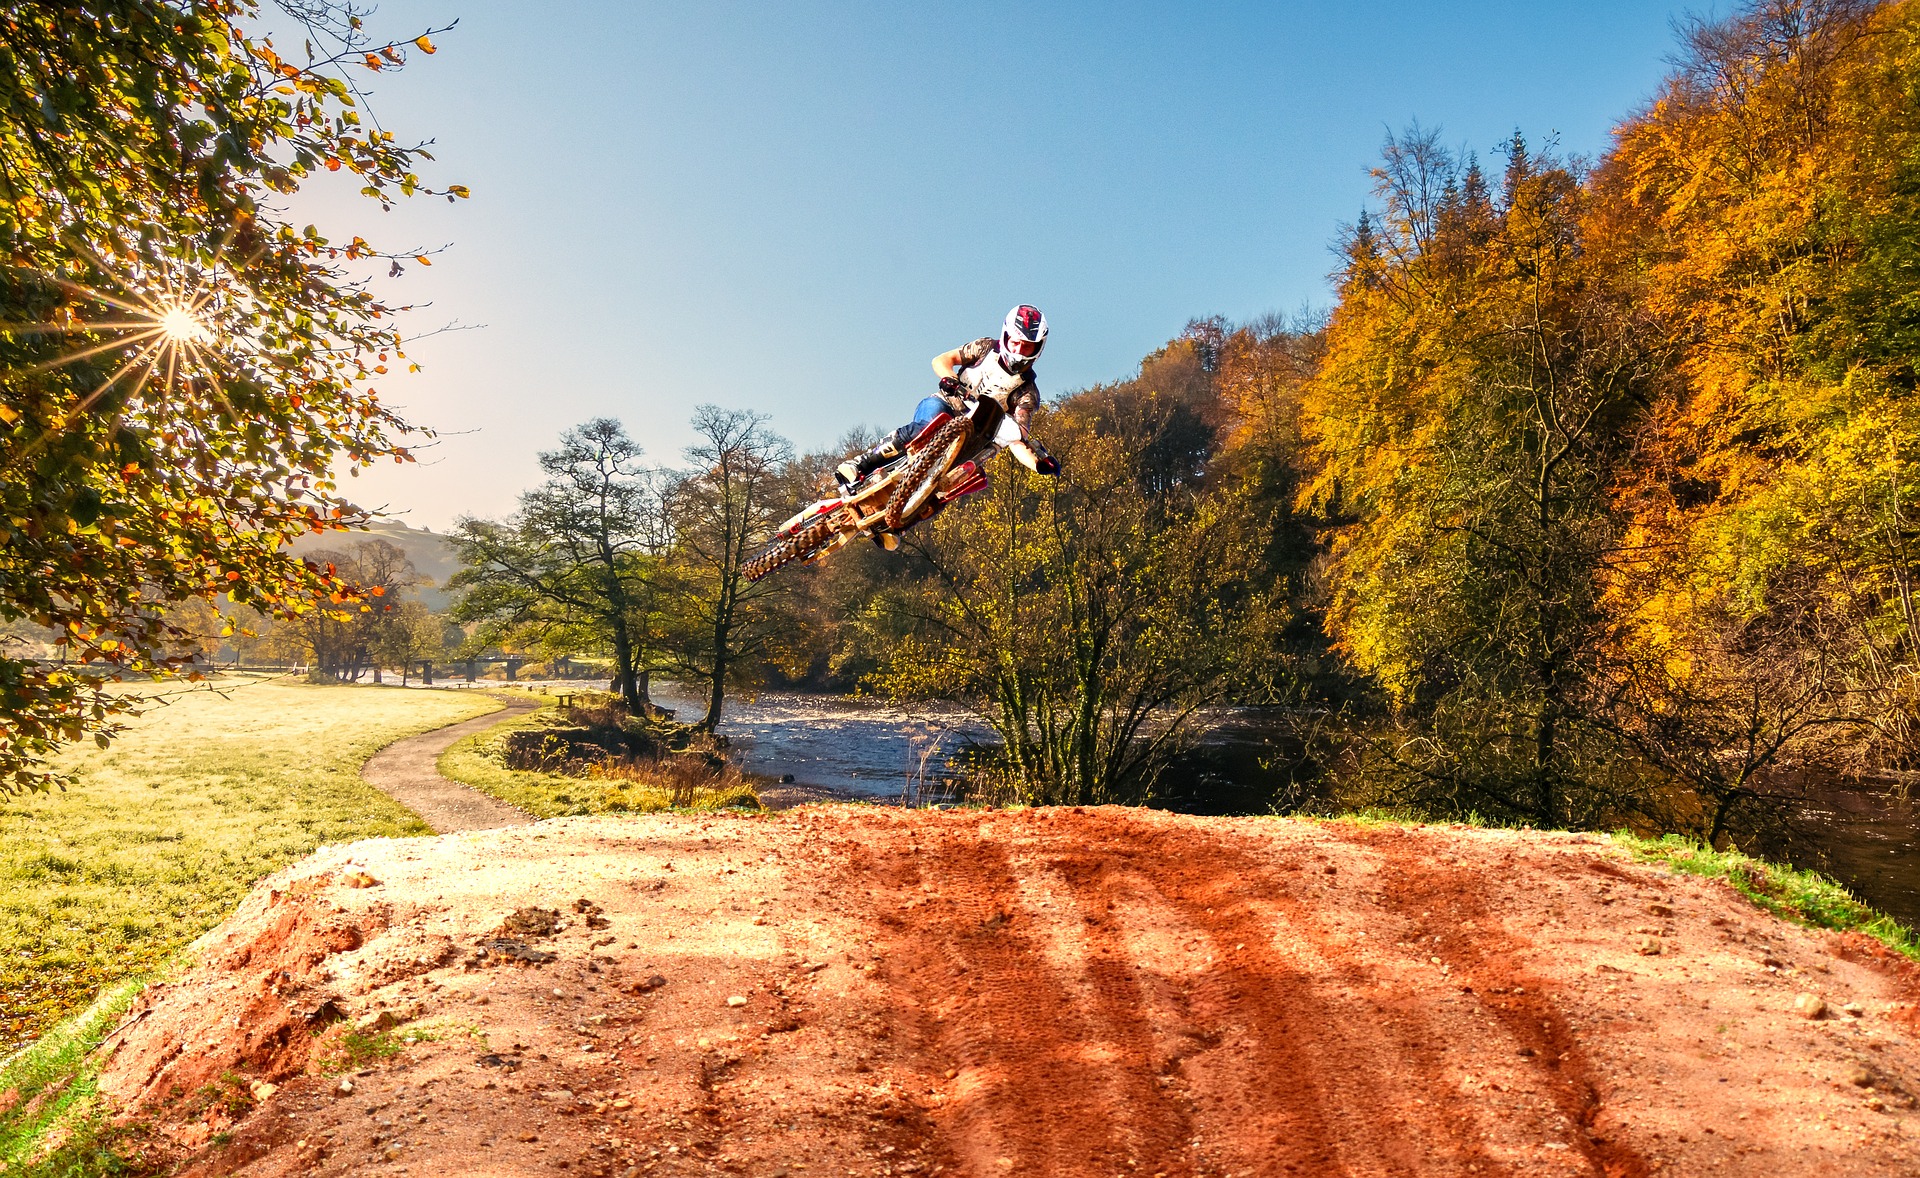 The Best Off-Road Tracks and Courses in the UK - Beginner Biker